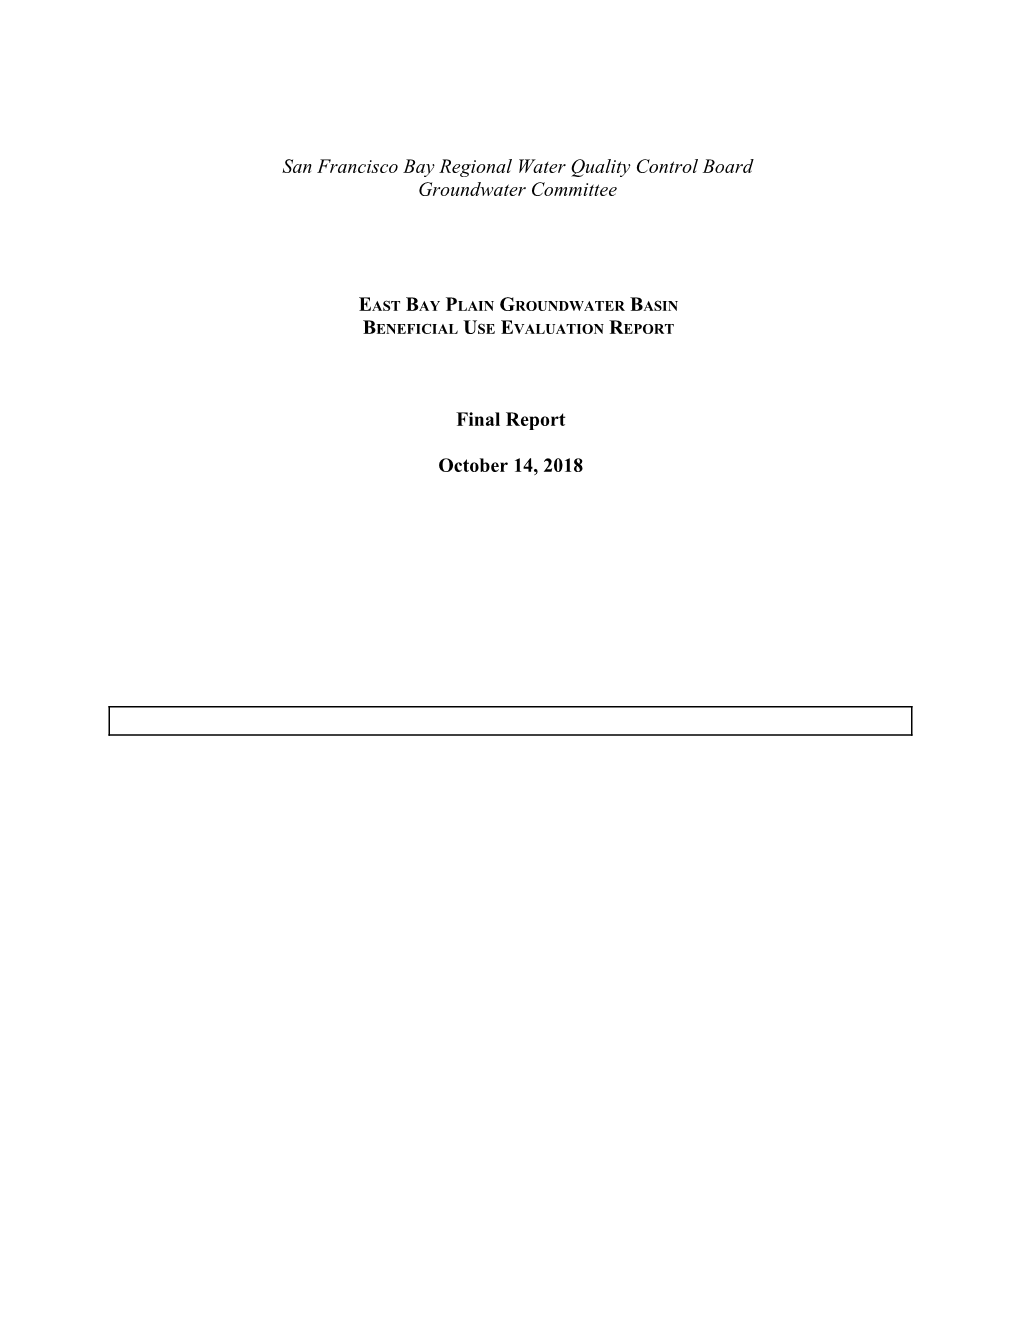 East Bay Plain Groundwater Basin Beneficial Use Evaluation Report